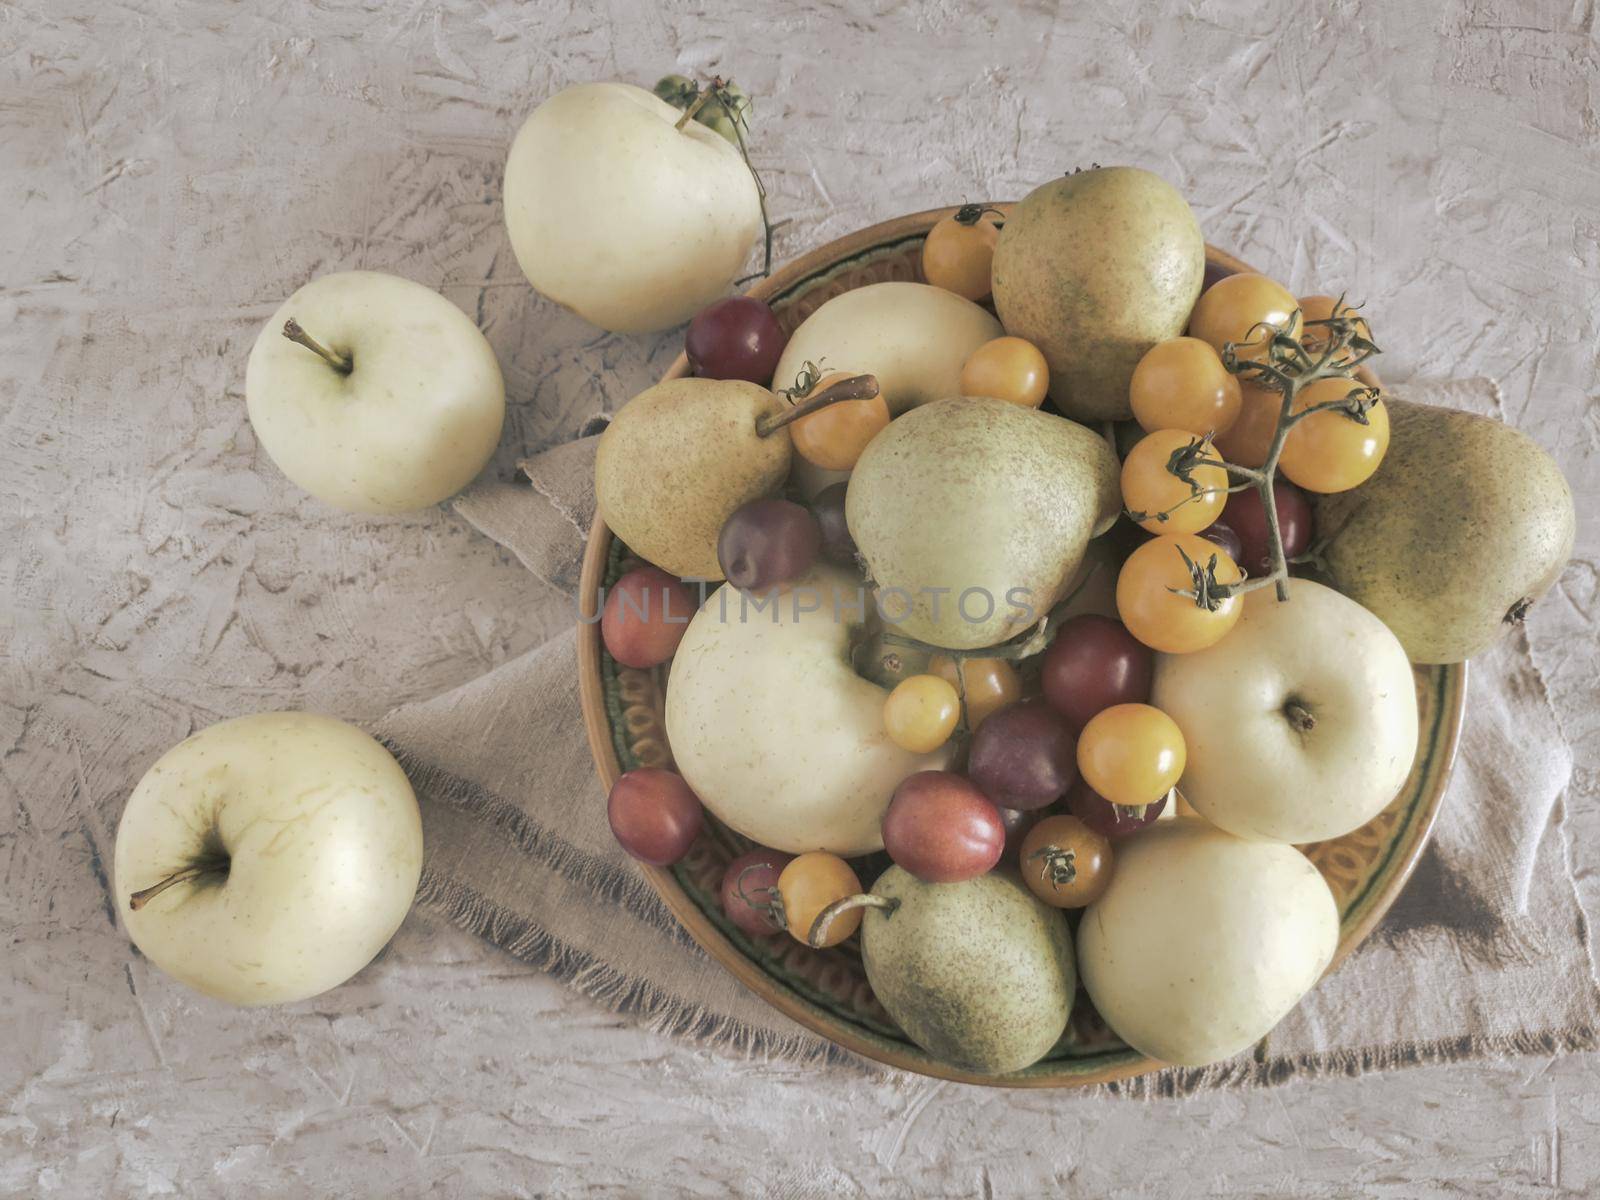 Ripe apples, pears and plums are on the table in a ceramic plate